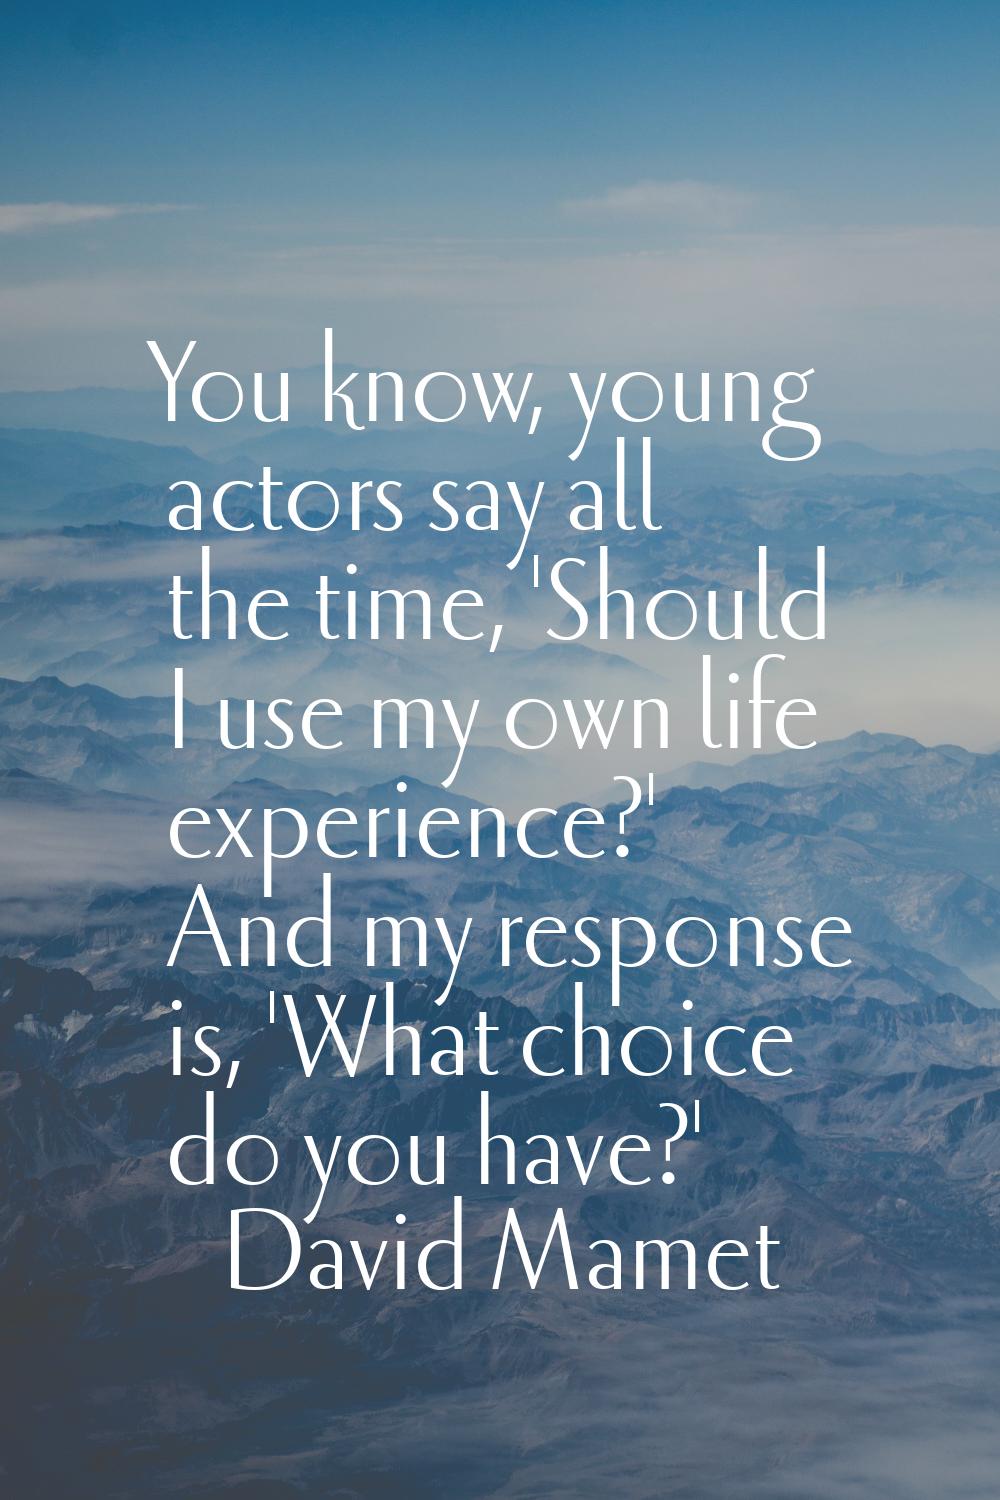 You know, young actors say all the time, 'Should I use my own life experience?' And my response is,